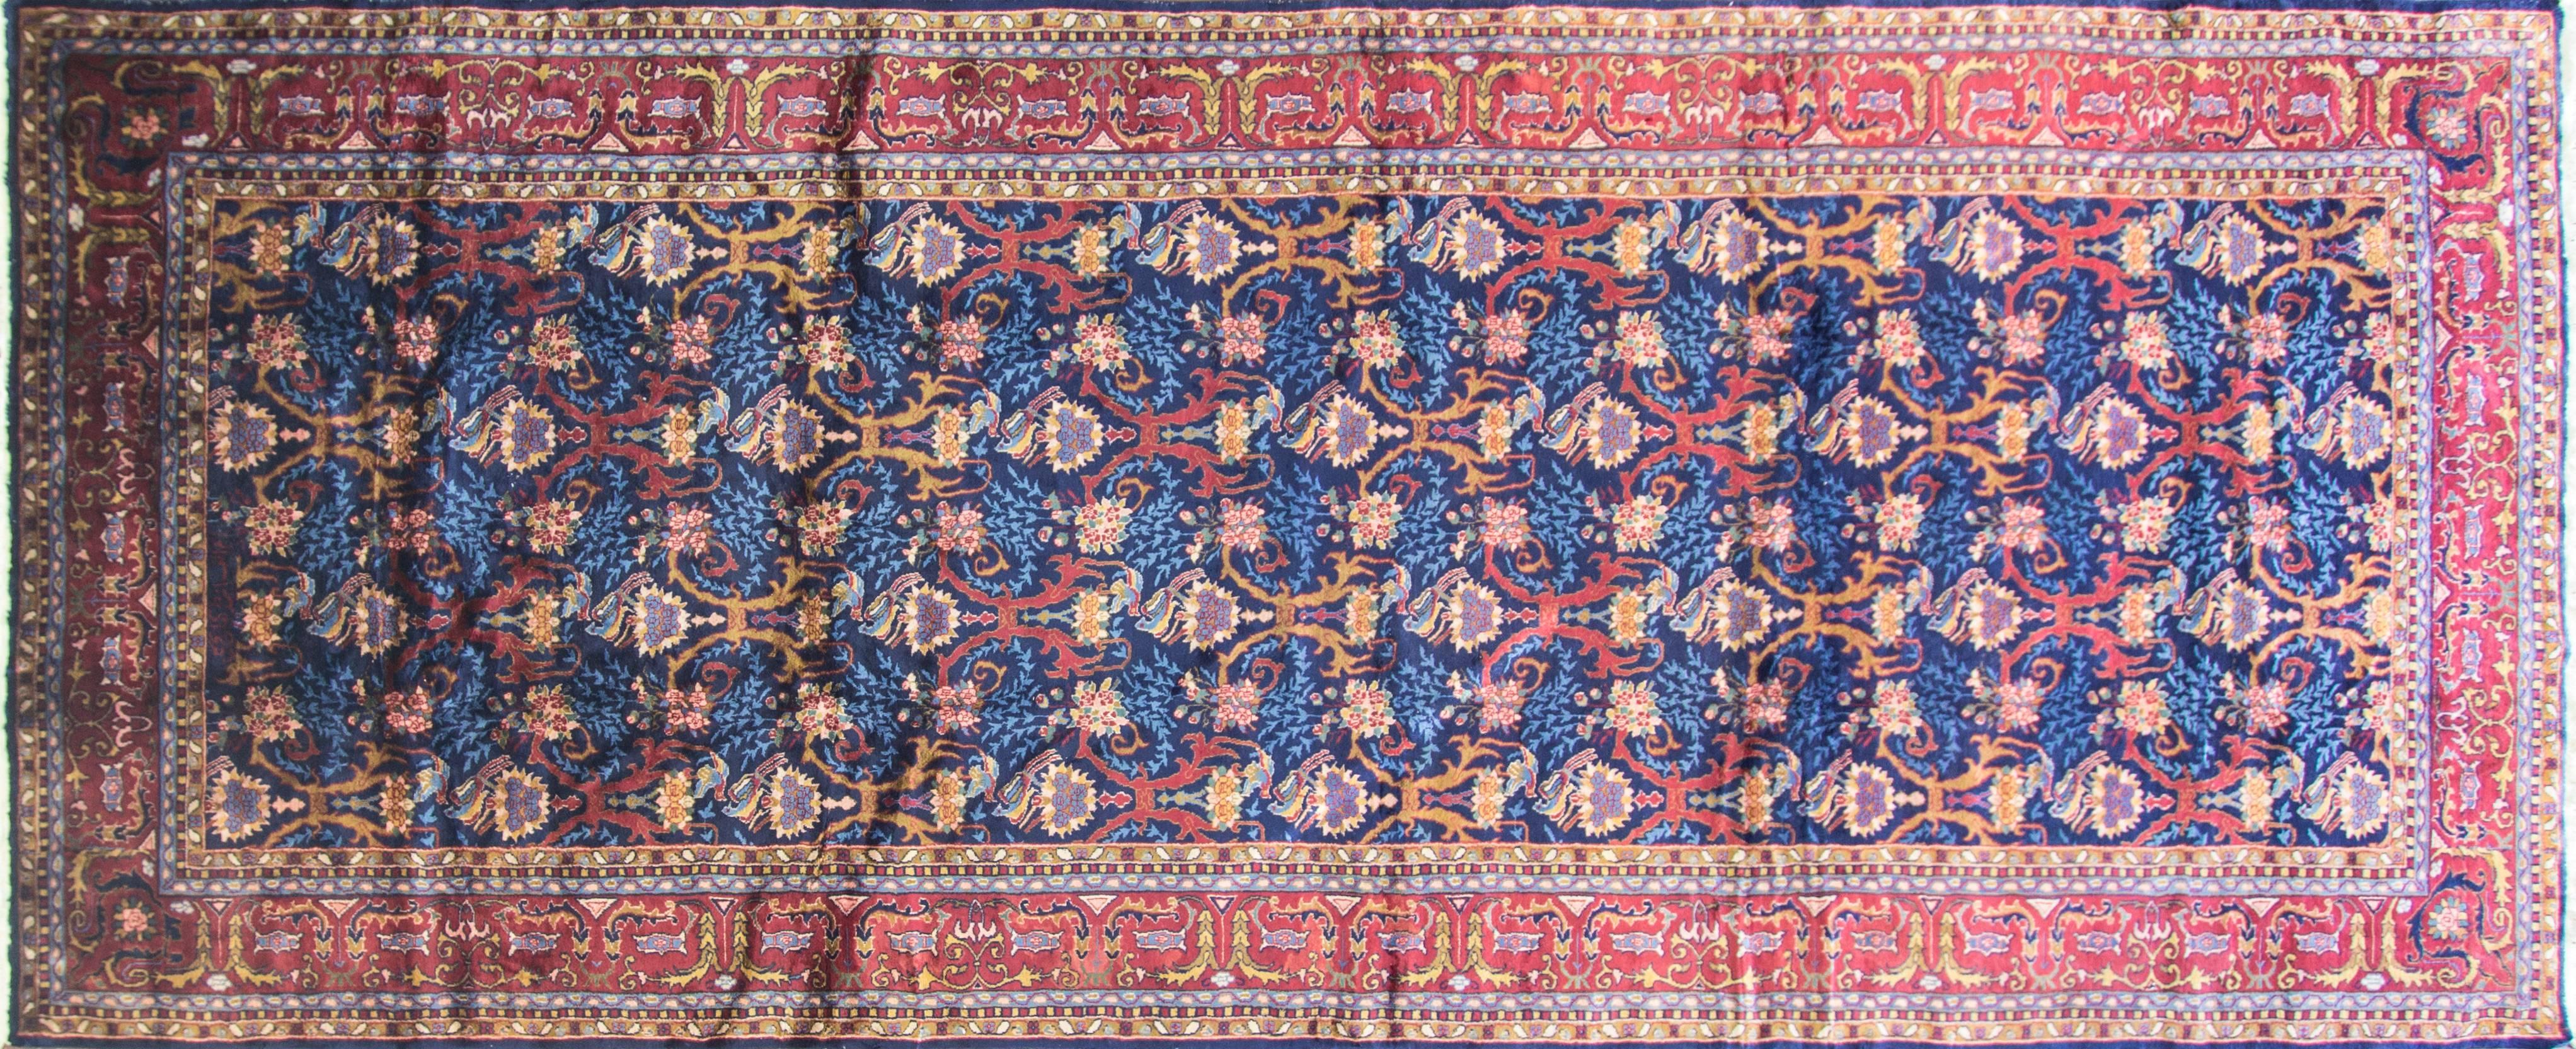 Agra gallery size carpet, birds in love in excellent condition, reduced in size, circa 1920.
Agra is a large city and weaving district in North Central India that has been prolific in producing tightly knotted, decorative, floral rugs. Antique Agra